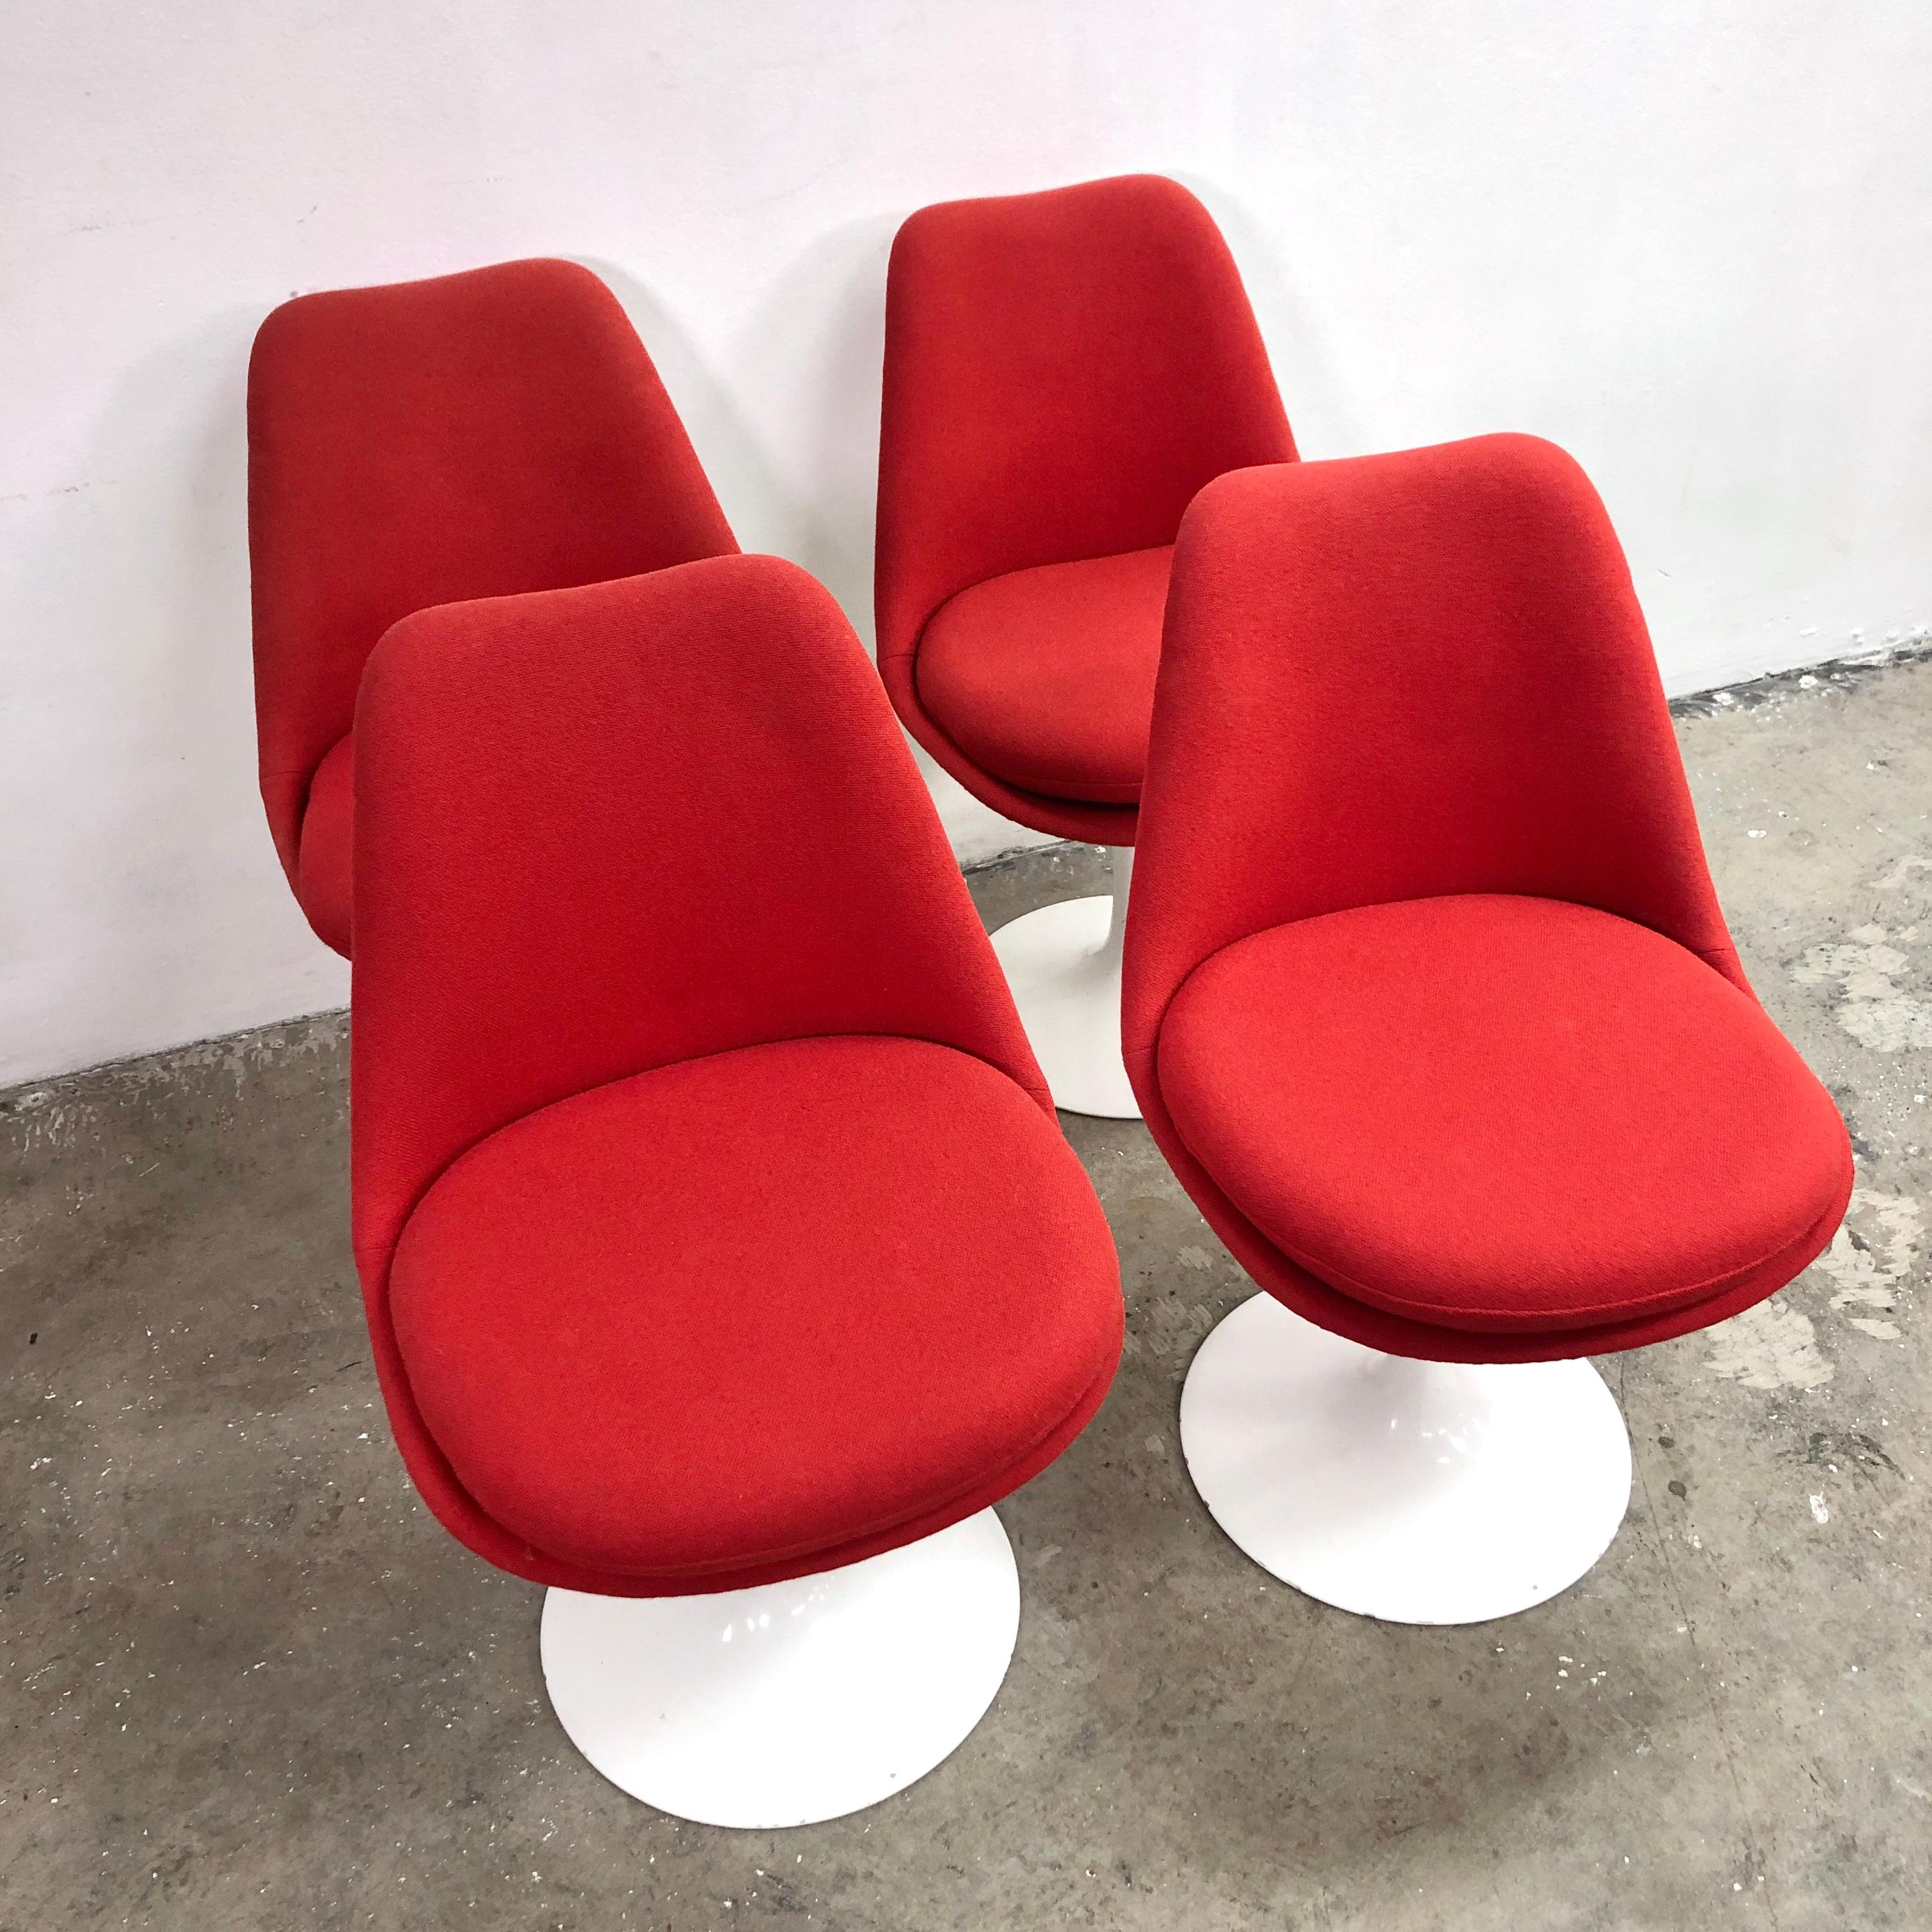 Great mid century C1960s original Eero Saarinen for Knoll five piece dining suite. The set consists of 4 original fiberglass swivel tulip style dining chairs with matching pedestal round marble table. The table base is the early original cast iron